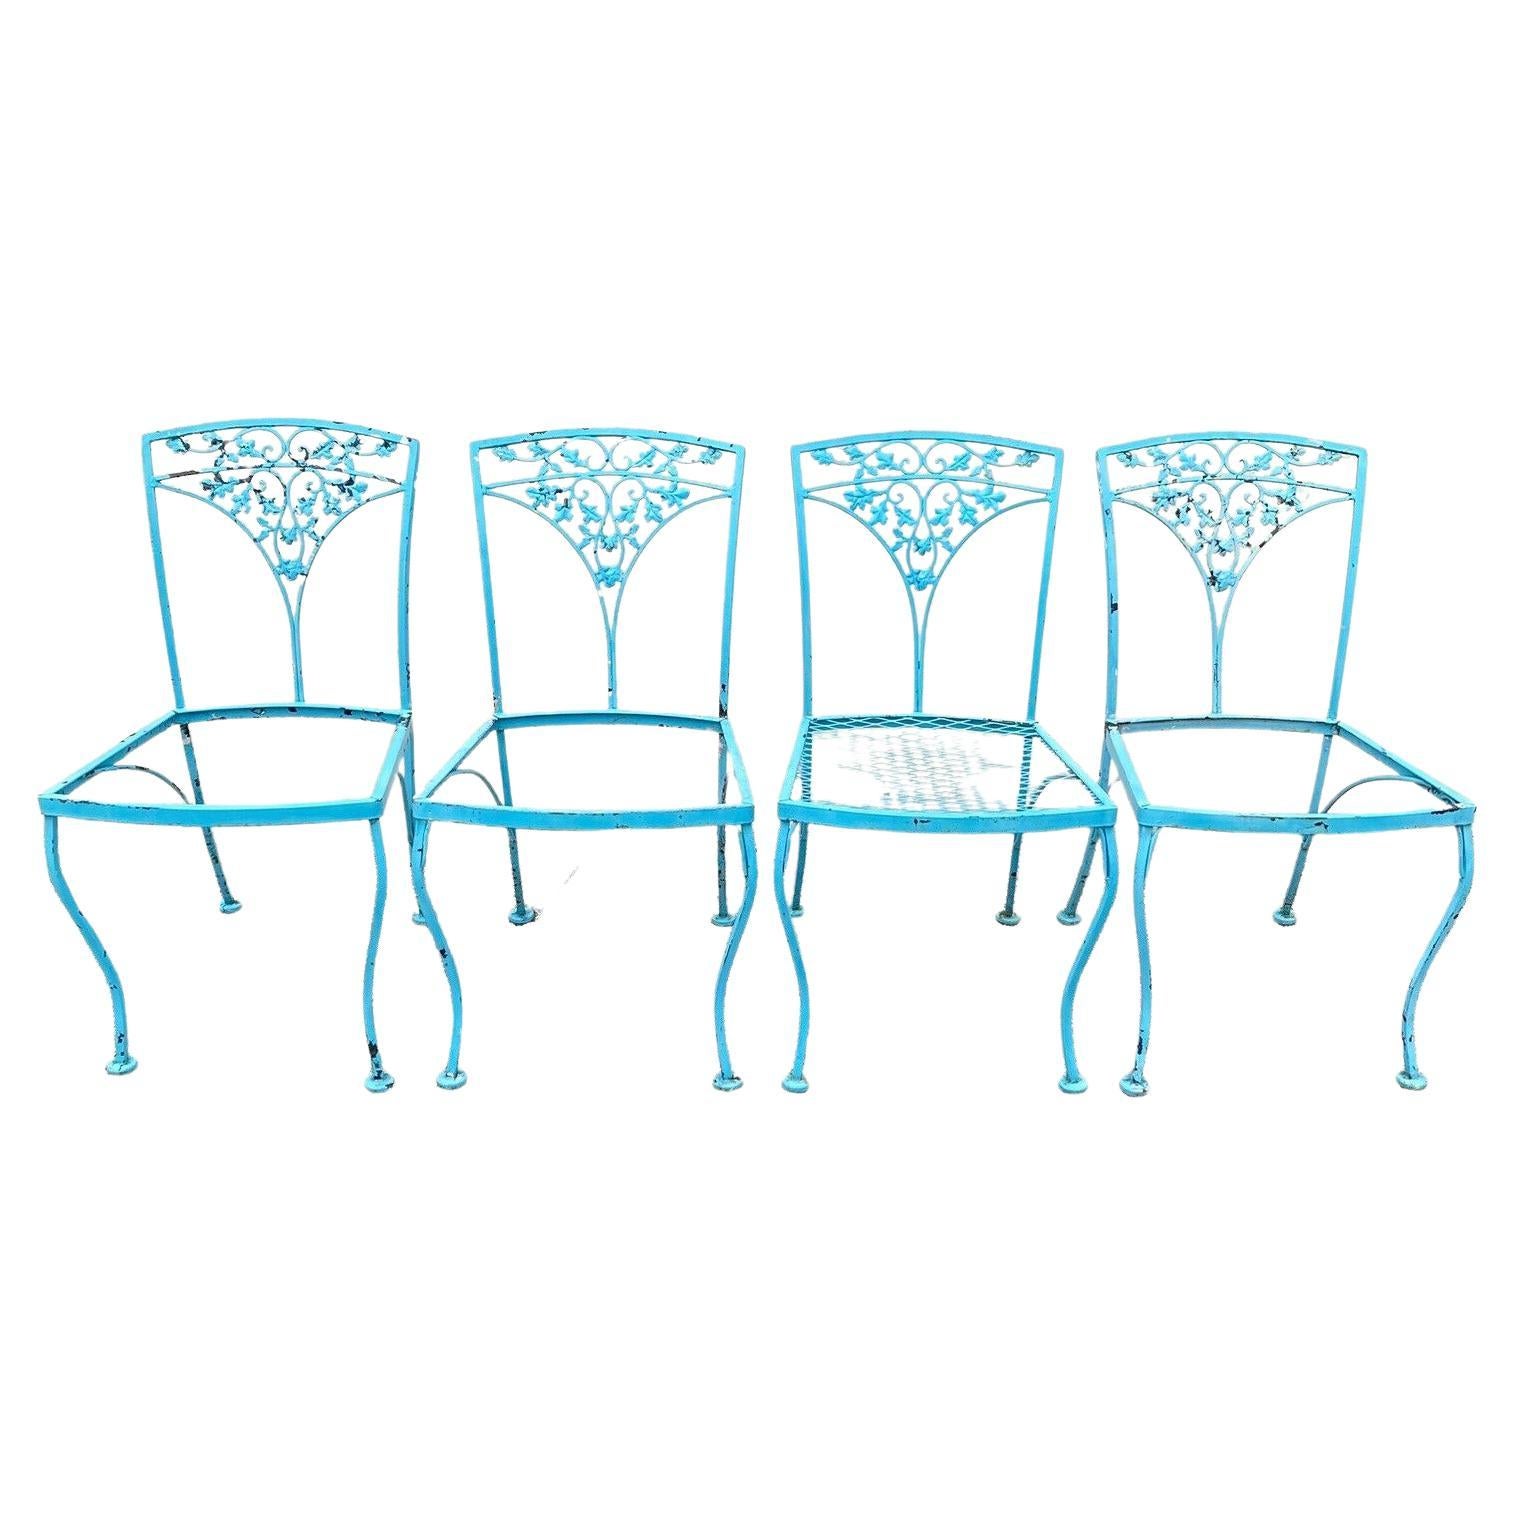 Vintage Woodard Orleans Pattern Wrought Iron Garden Patio Dining Chairs Set of 4 For Sale